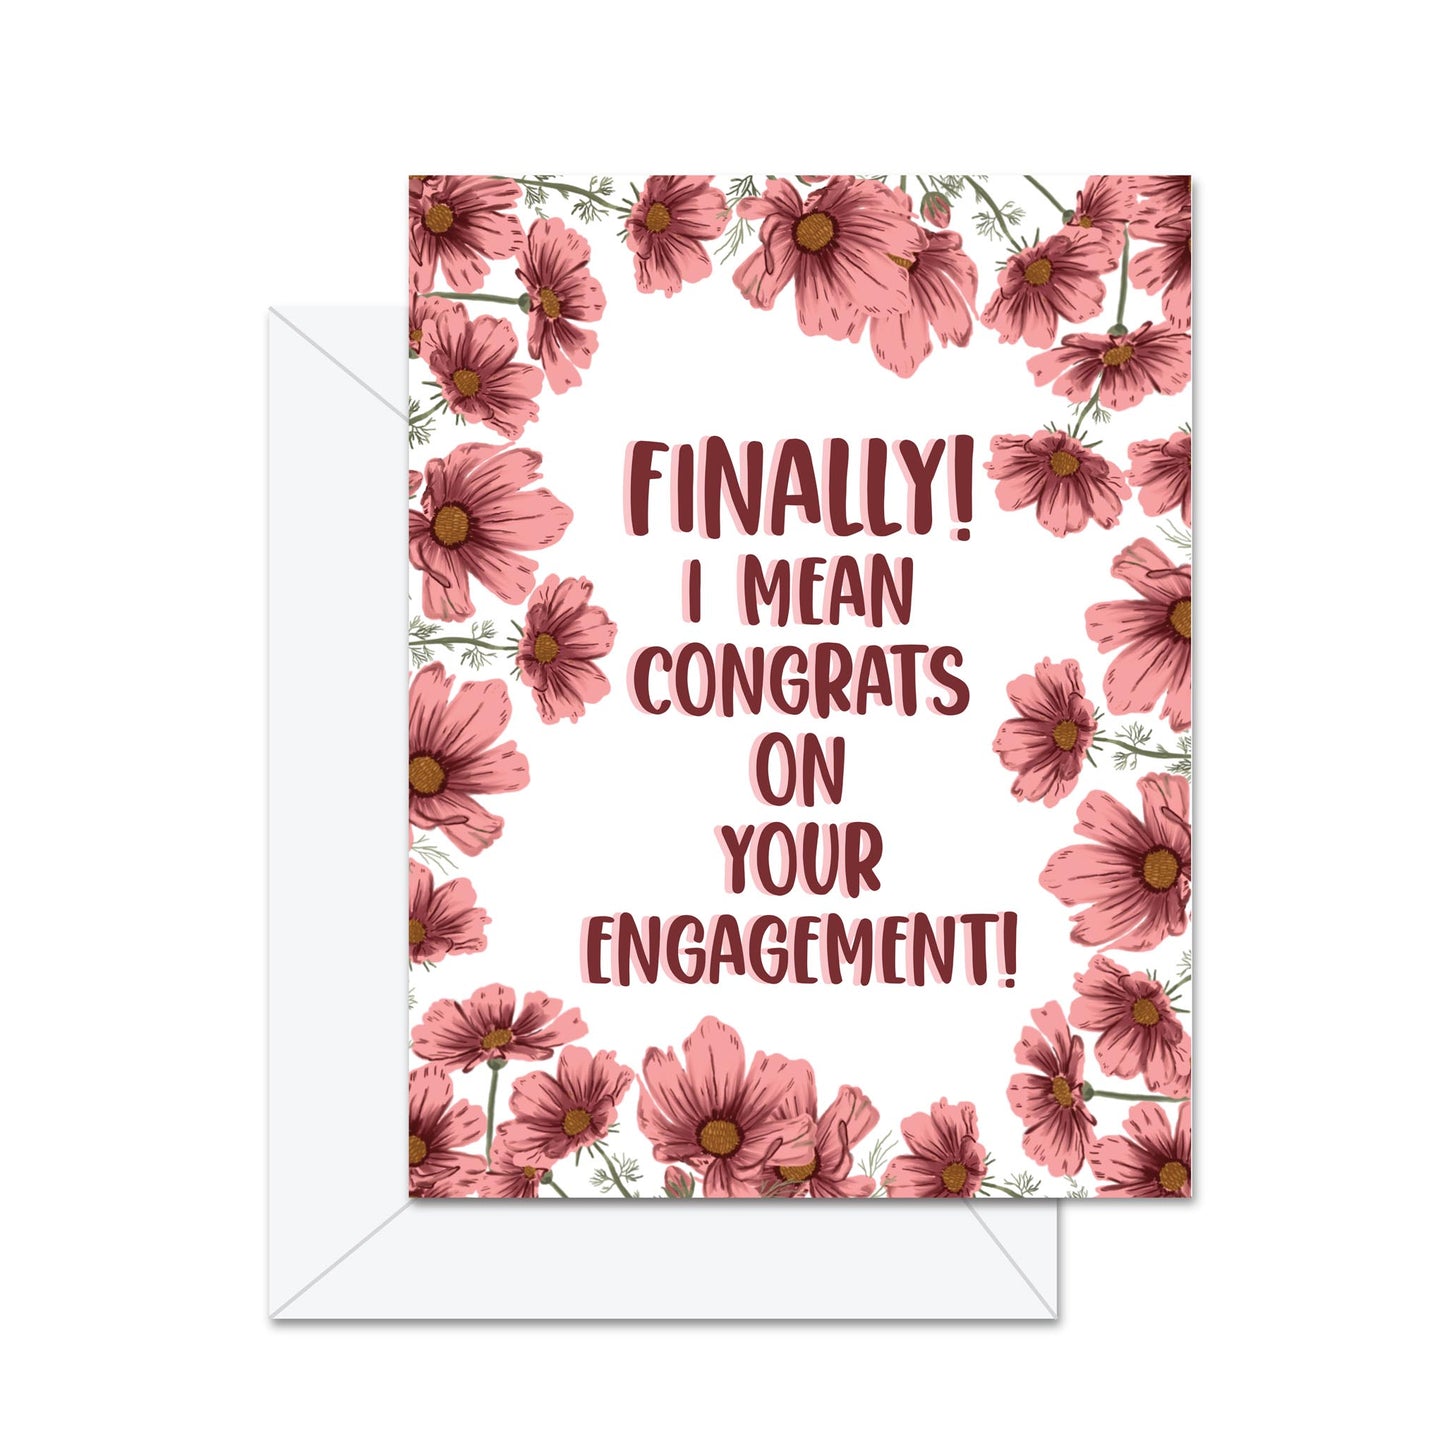 Finally! I Mean Congrats On The Engagement! - Greeting Card